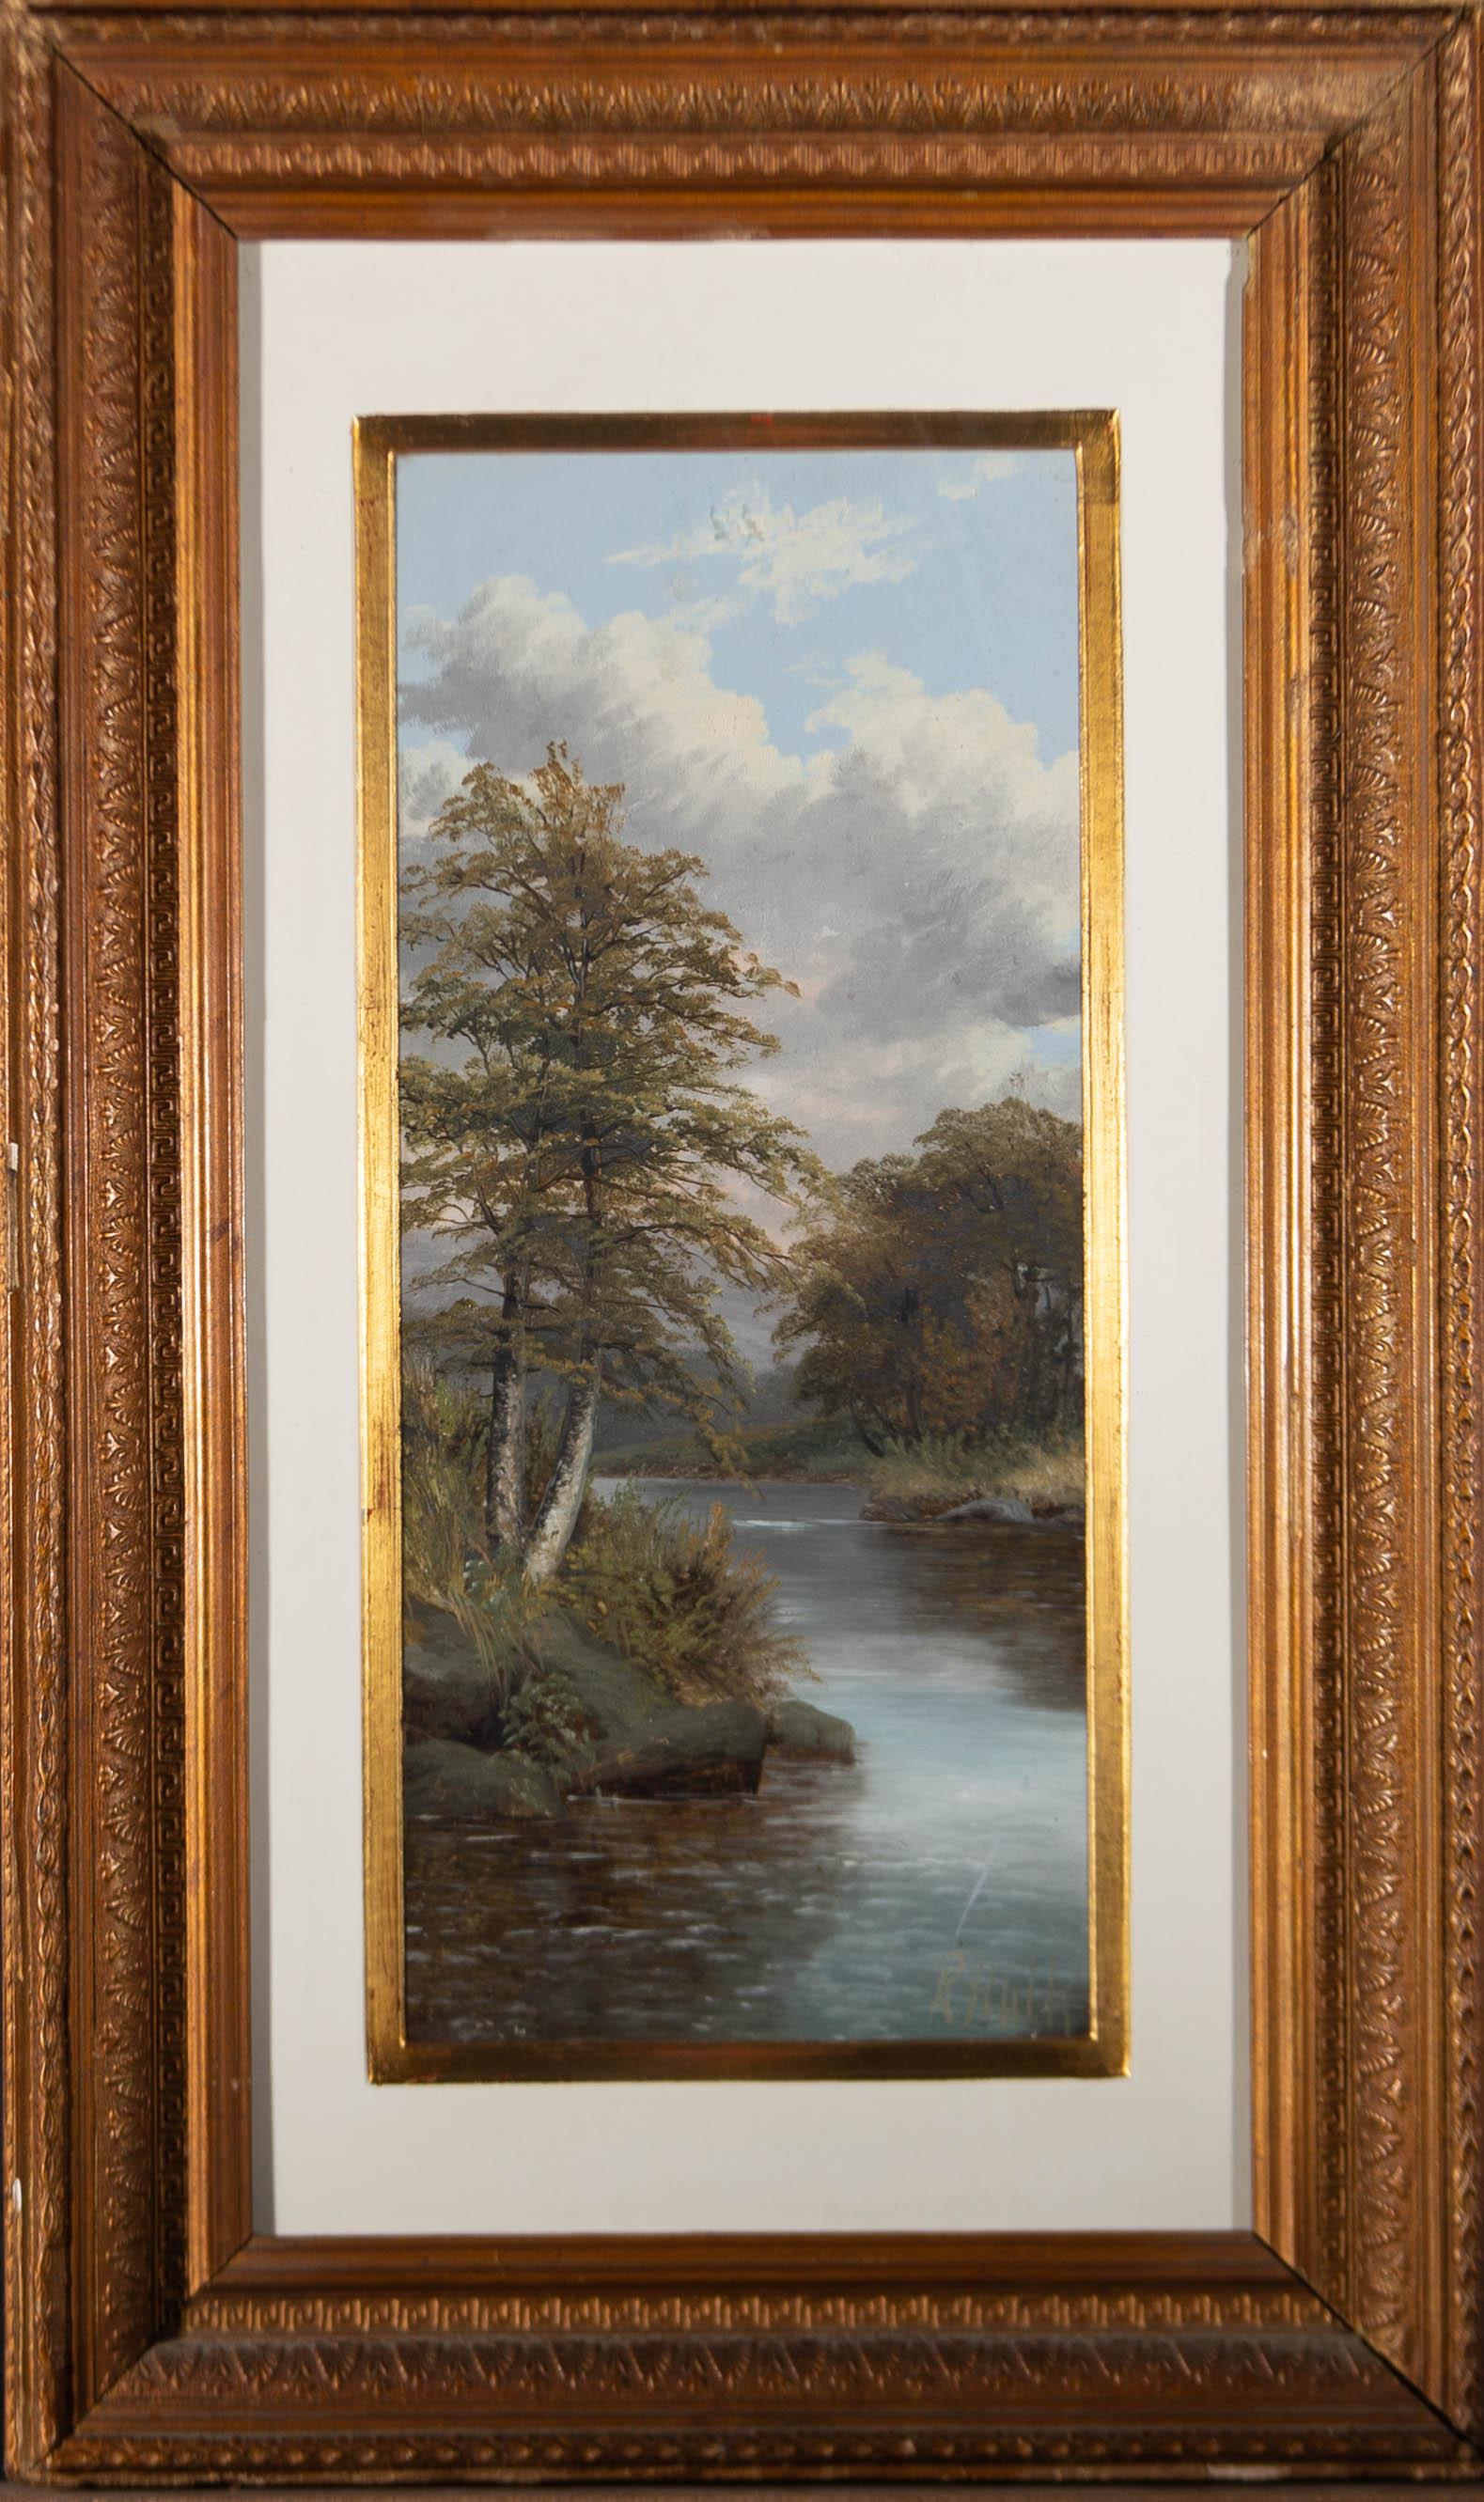 A charming river scene with trees by R. Hulk. Signed to the lower right-hand corner. Well-presented in a white and gold painted mount and in an ornate gilt effect frame, as shown. On board.